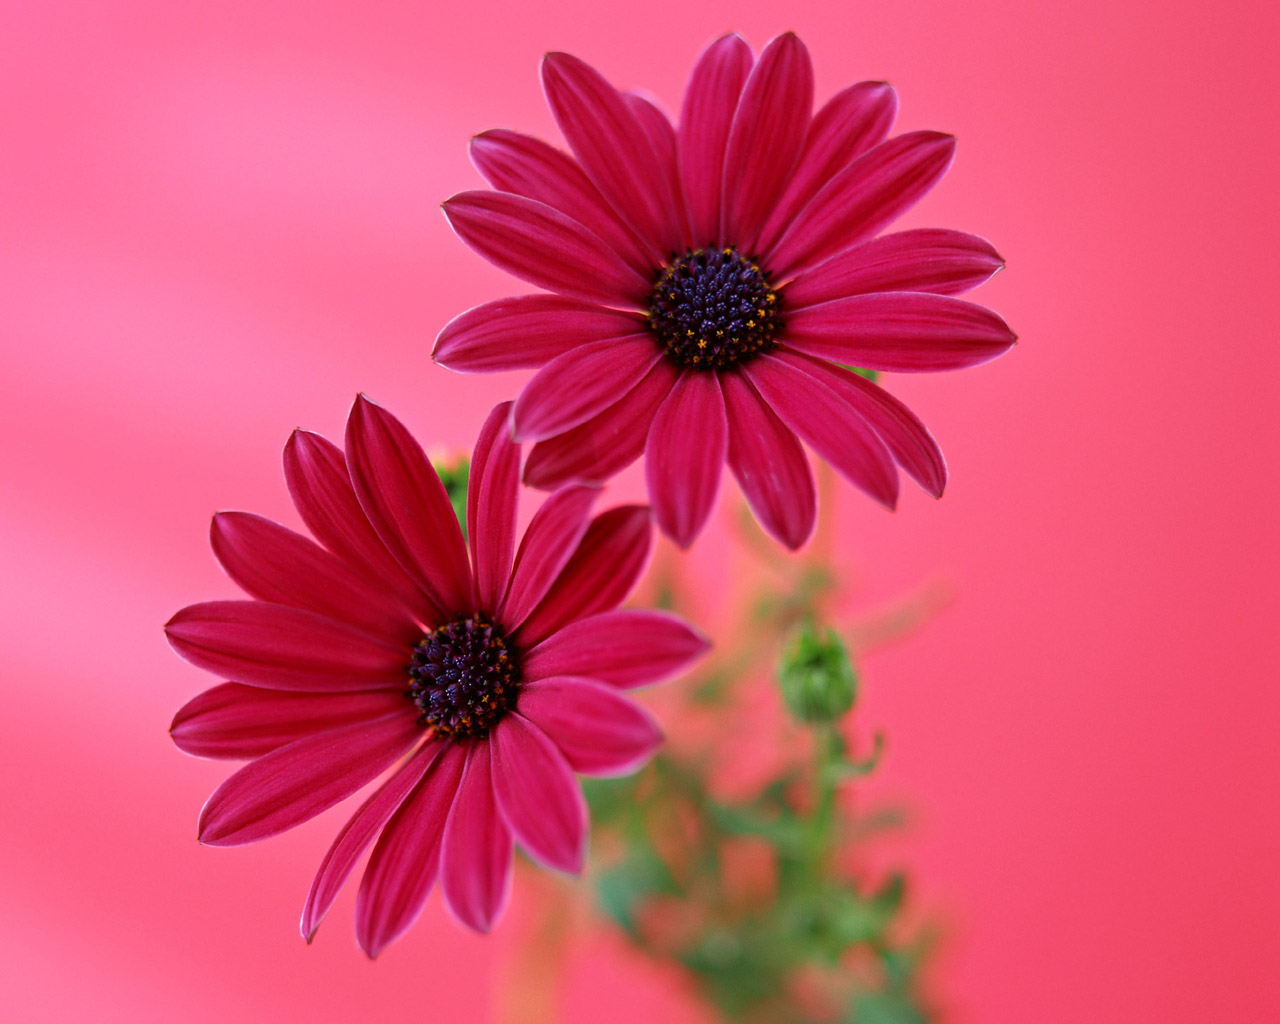 Gerbera Daisy Flower Gerbera Daisy is easy to grow in our garden and